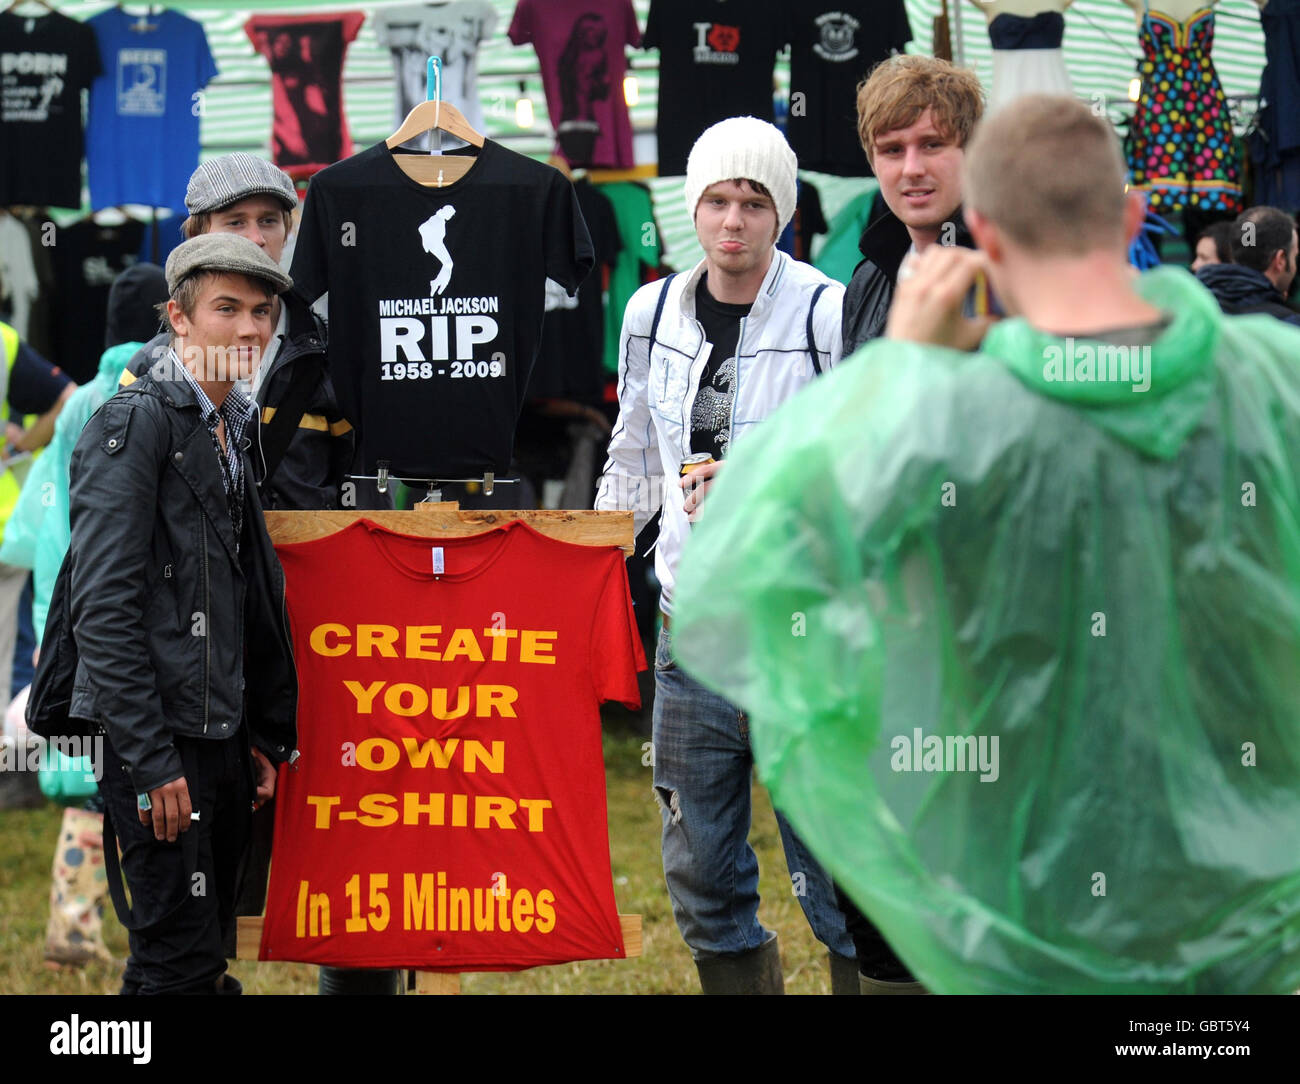 Festival goers pose for pictures beside a Michael Jackson tribute t-shirt during the 2009 Glastonbury Festival in Pilton, Somerset. Stock Photo